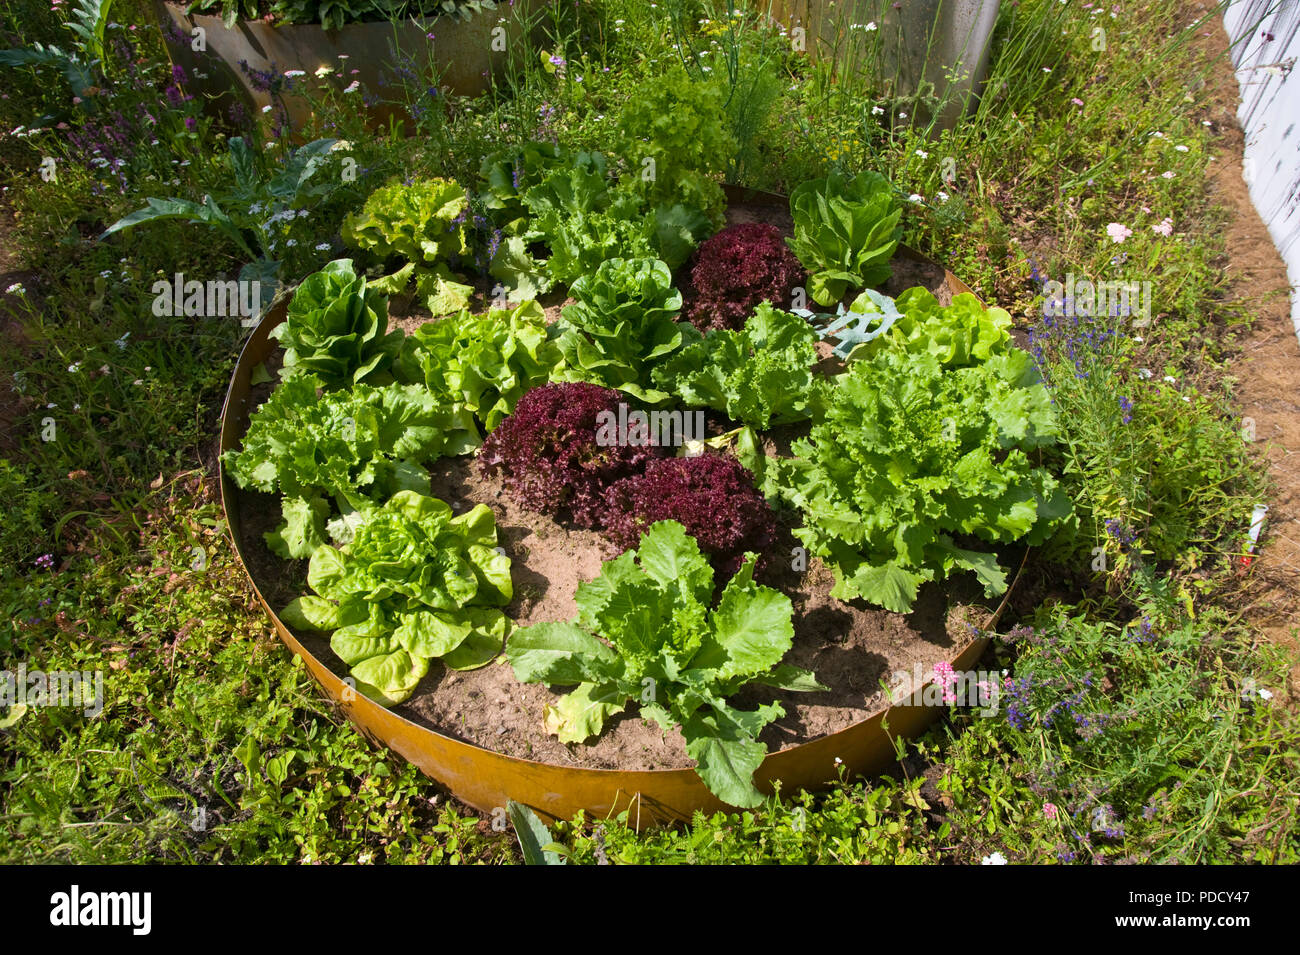 Lettuce growing in a circular container at RHS Tatton Park flower show Cheshire England UK Stock Photo